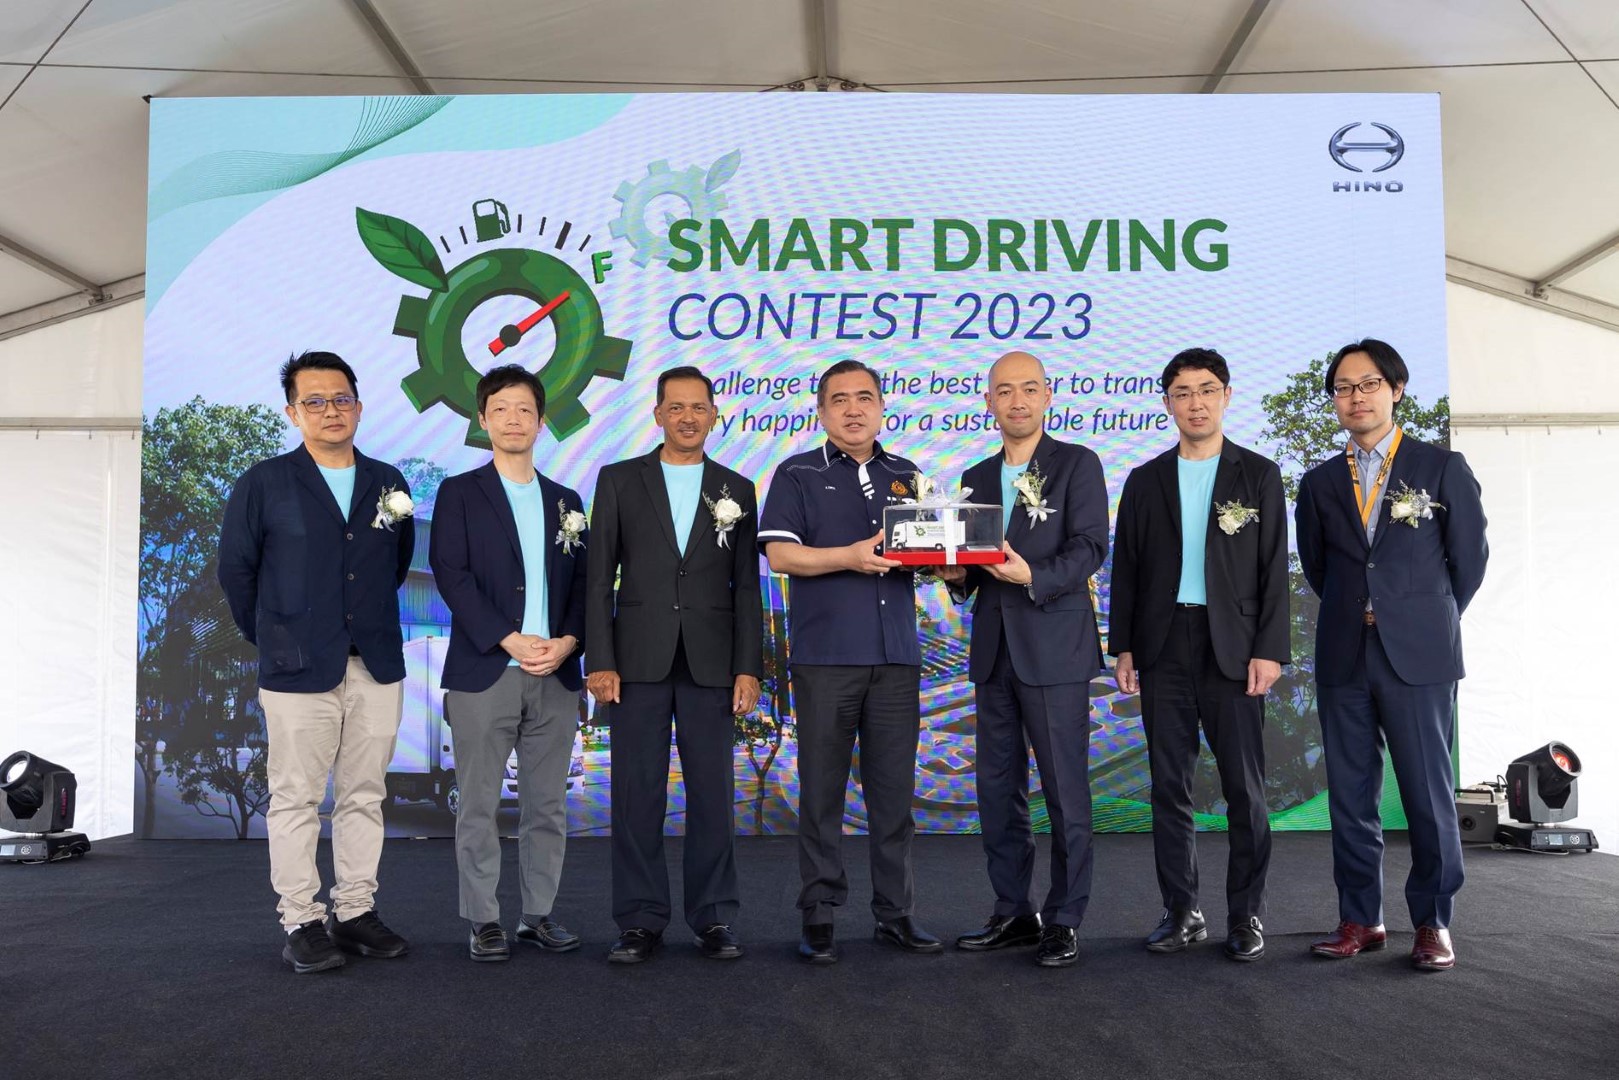 Hino Smart Driving Contest returns after three years